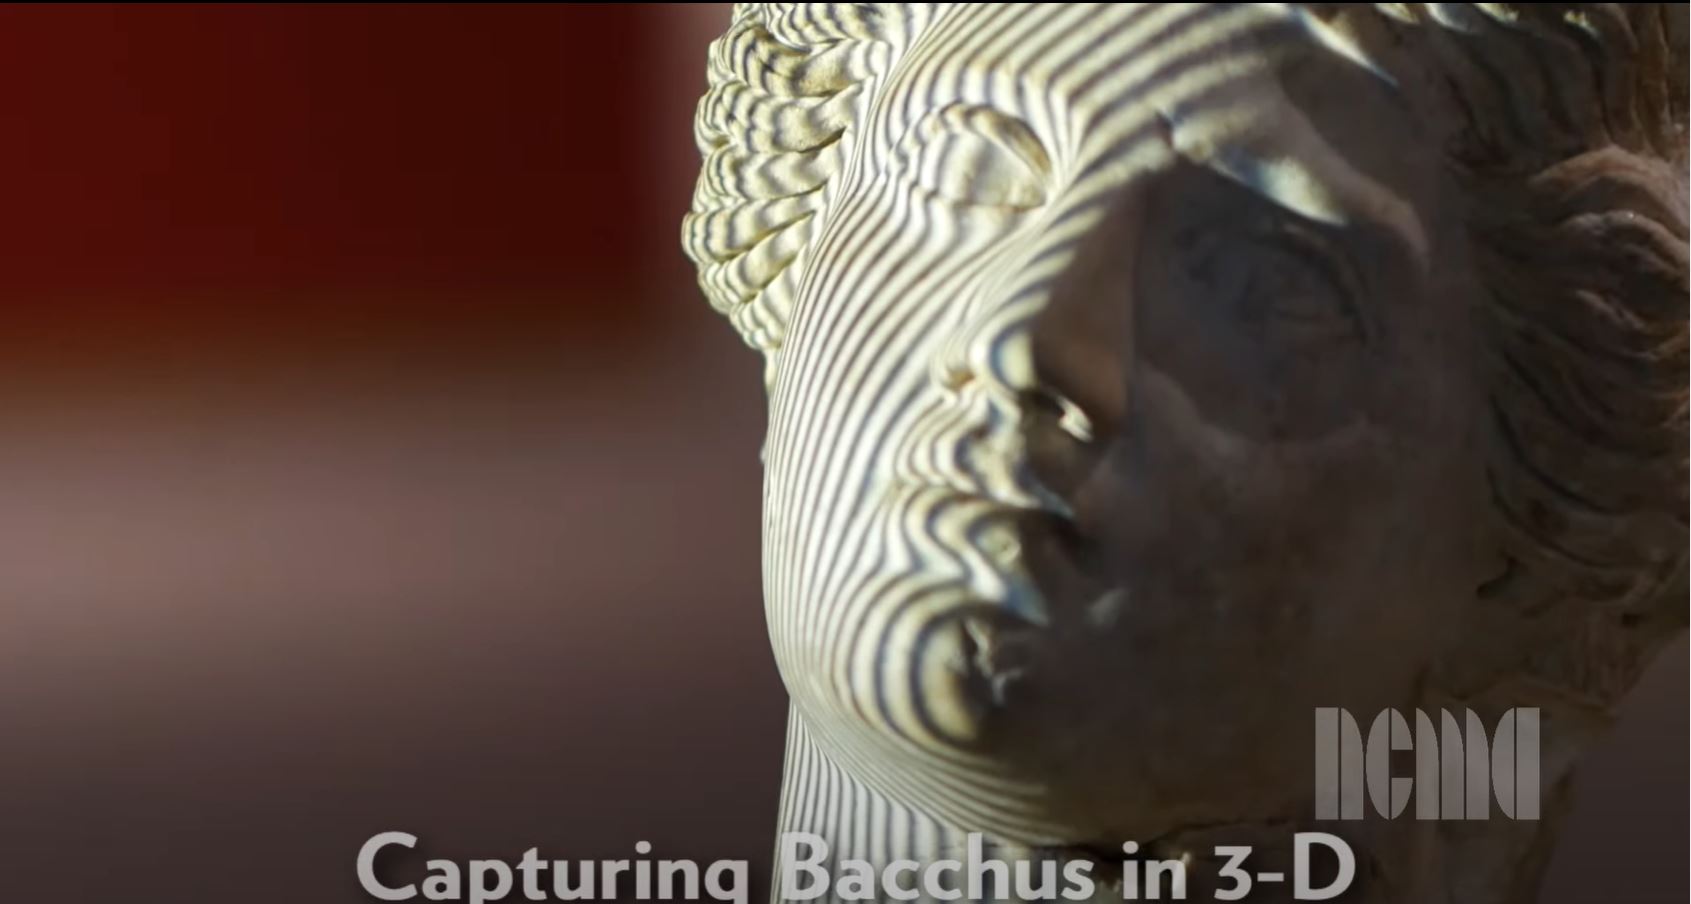 A YouTube video from the North Carolina Museum of Art details a statue of Bacchus that was scanned using a structured light scanner as part of a reconstruction project. Researchers use a human model to mold a replacement arm for the broken statue. They print a test model using a 3D printer before sculpting a final version to be fitted to the statue. Other broken elements of the statue are reattached and the artificial elements are painted to match the rest of the statue, completing the reconstruction.